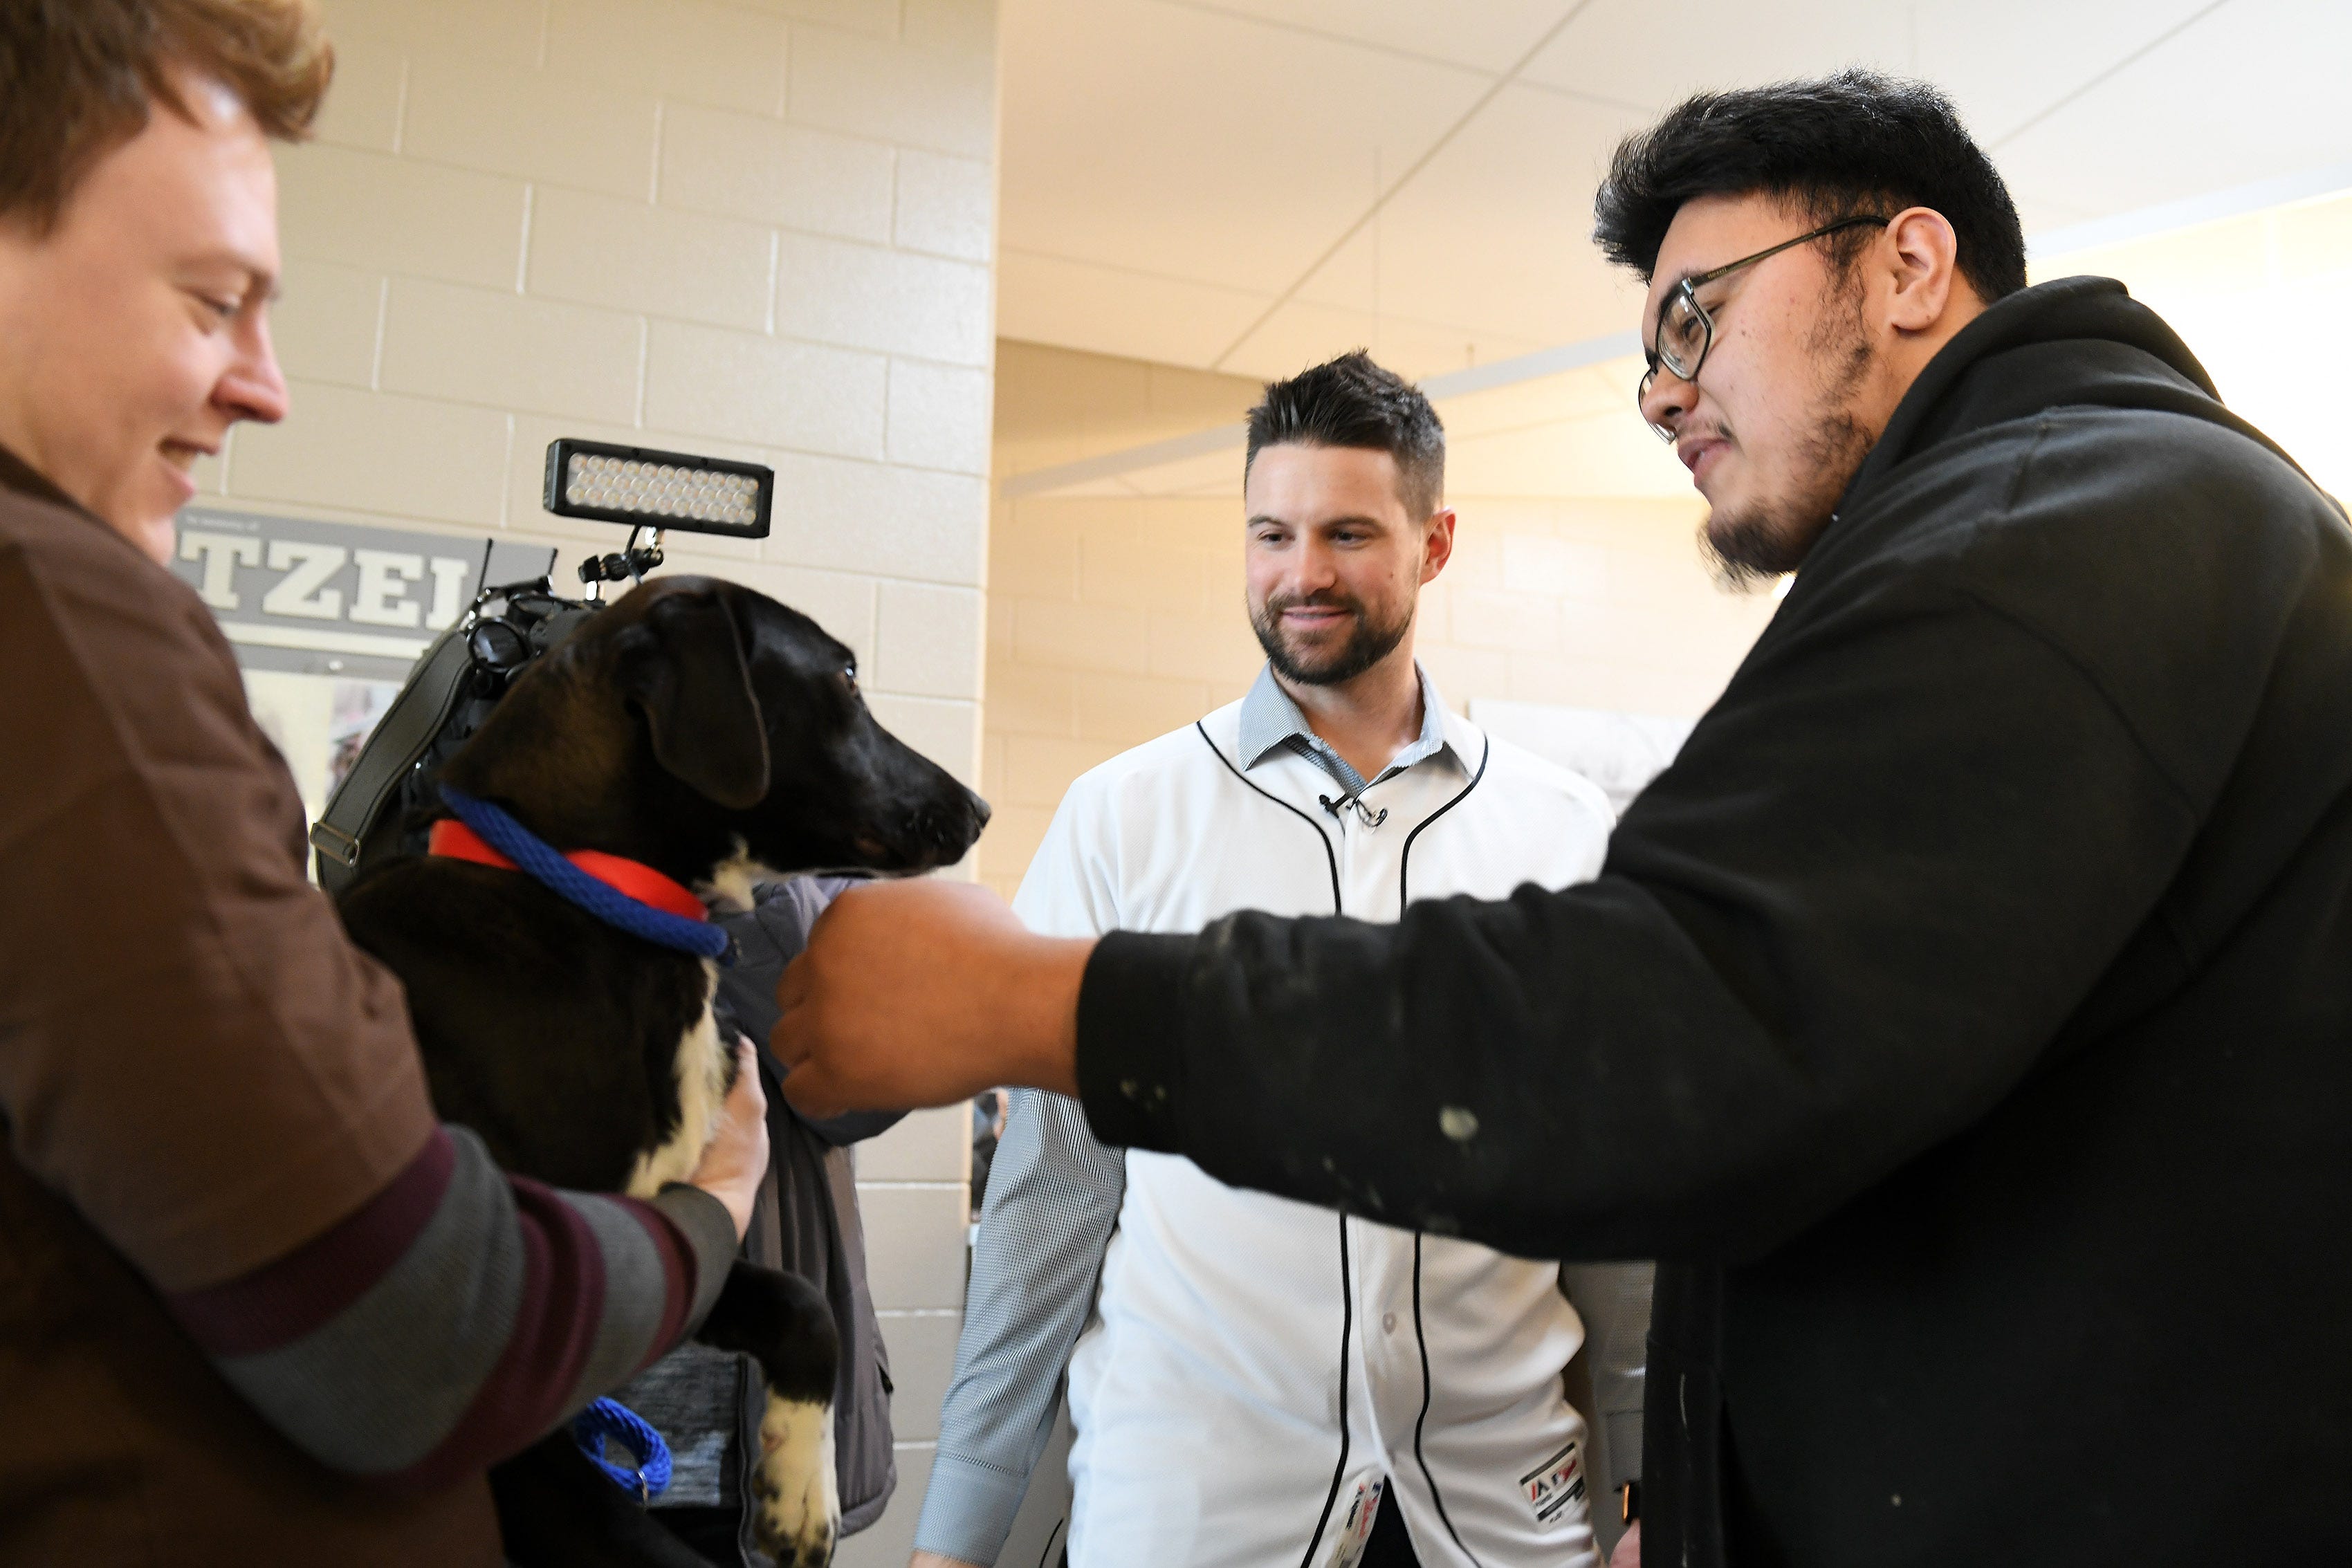 While Michigan Humane Society animal transport driver Jeremy Colborn holds her, Tigers shortstop Jordy Mercer and Marcelo Alvarado, 24, of Detroit, right, pet Lark, a Labrador that Marcelo is adopting, at the Michigan Humane Society.